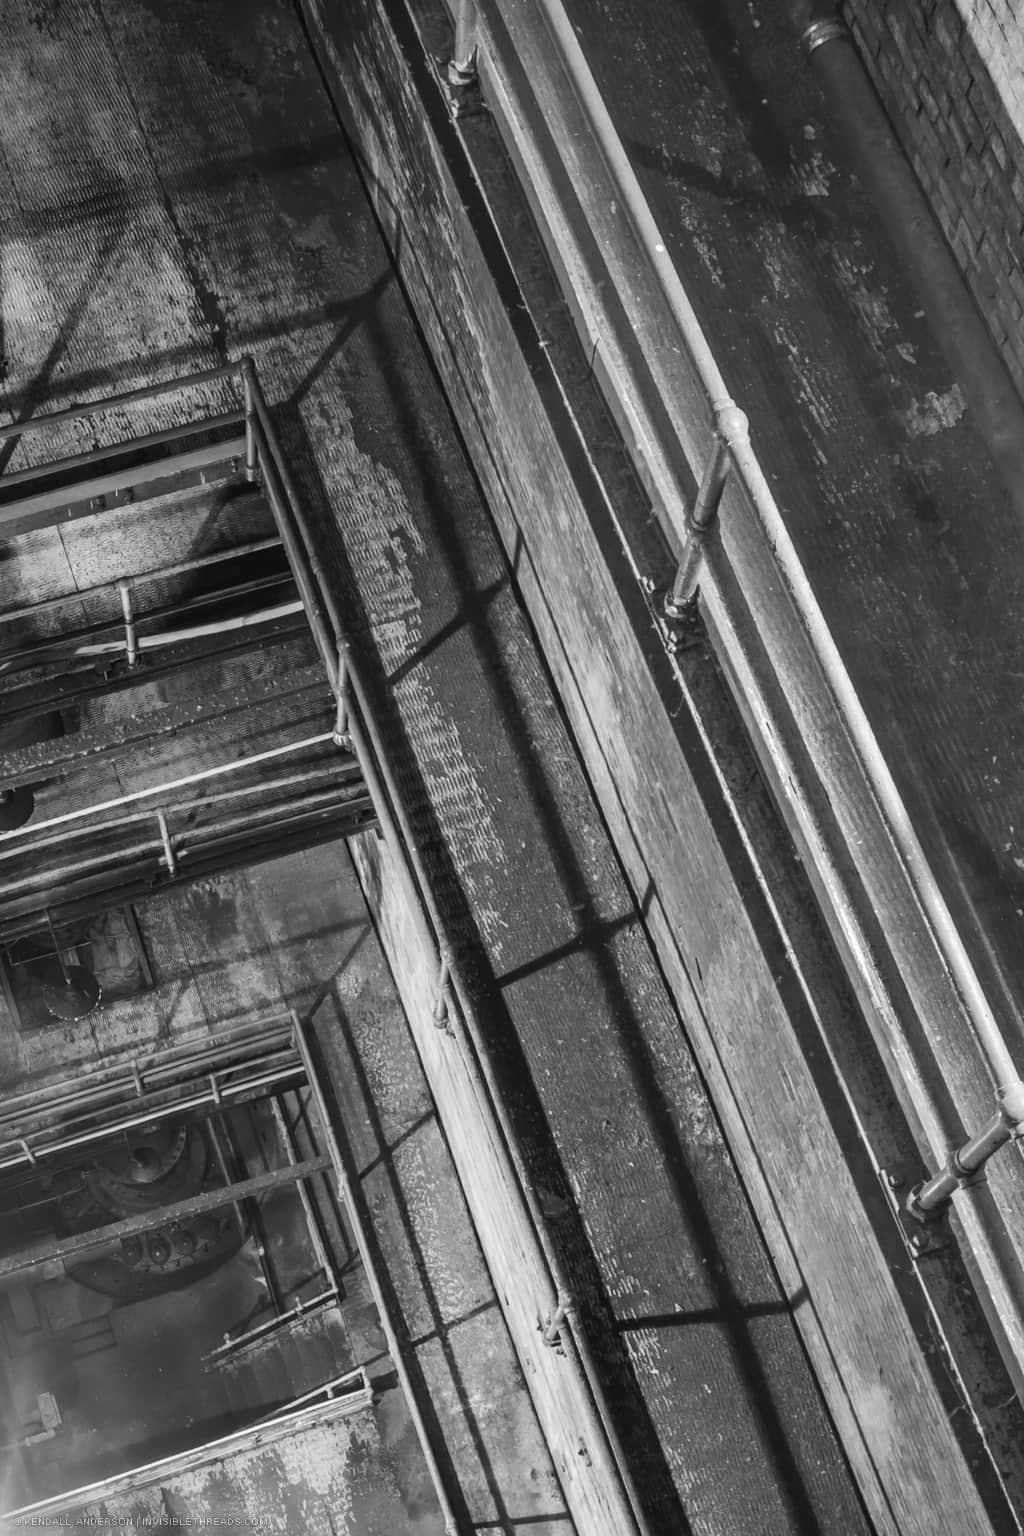 We are looking down at multiple levels of walkways, balconies and handrails leading down to the bottom of power station. These are the areas that provide access to the wheelpit, penstocks and turbines below ground.